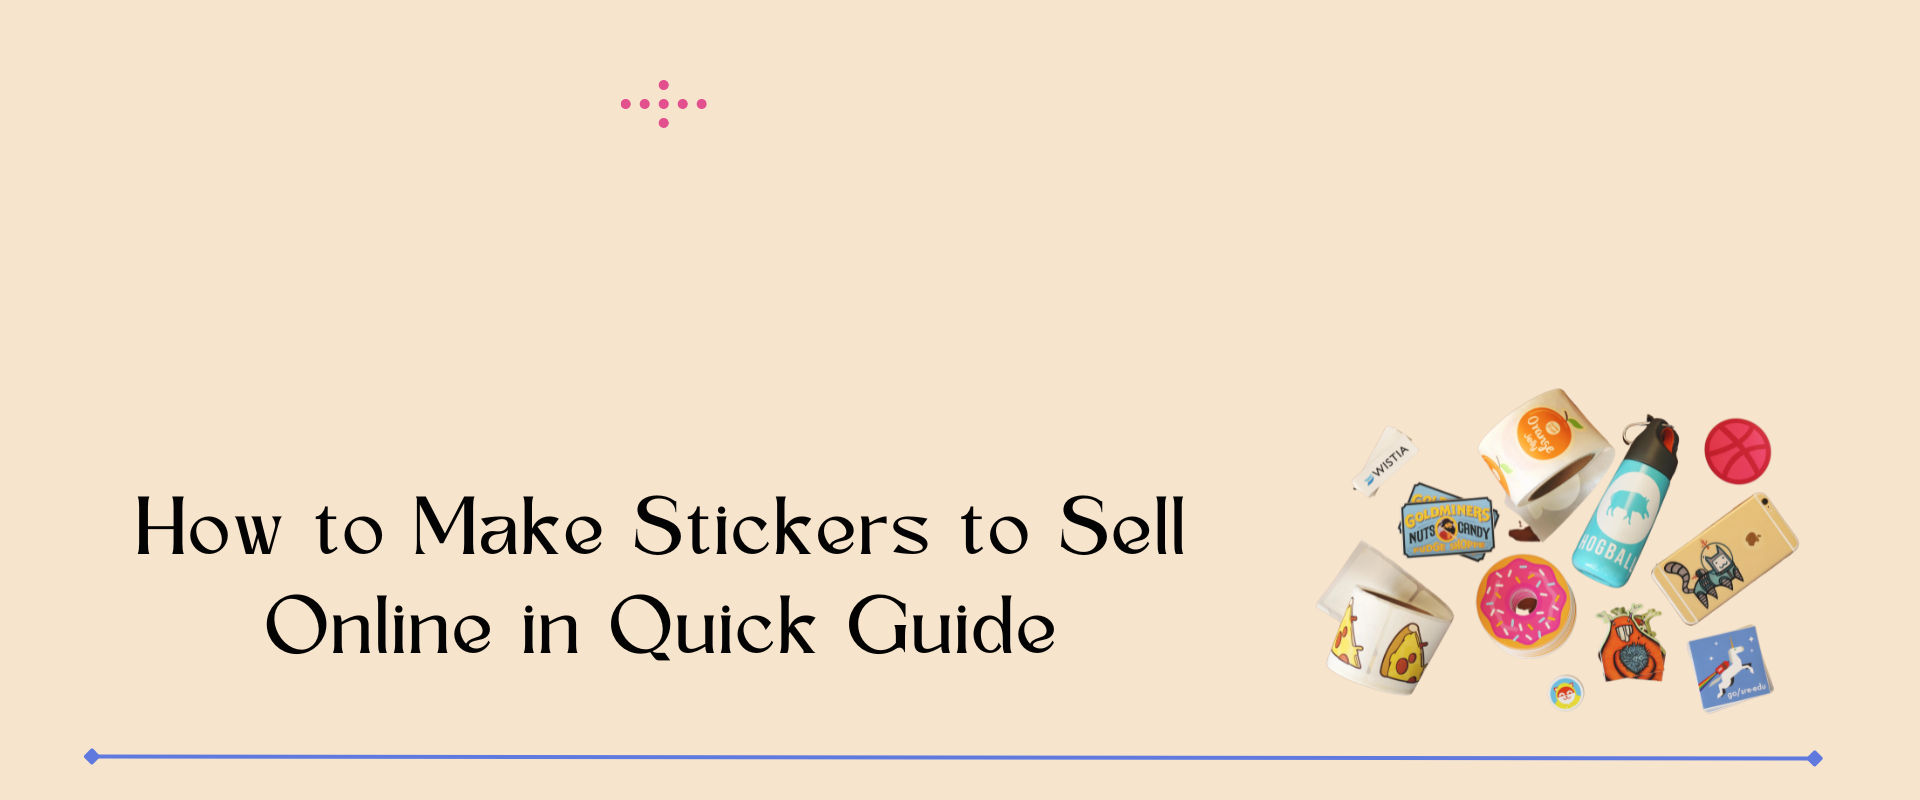 how to make stickers to sell online